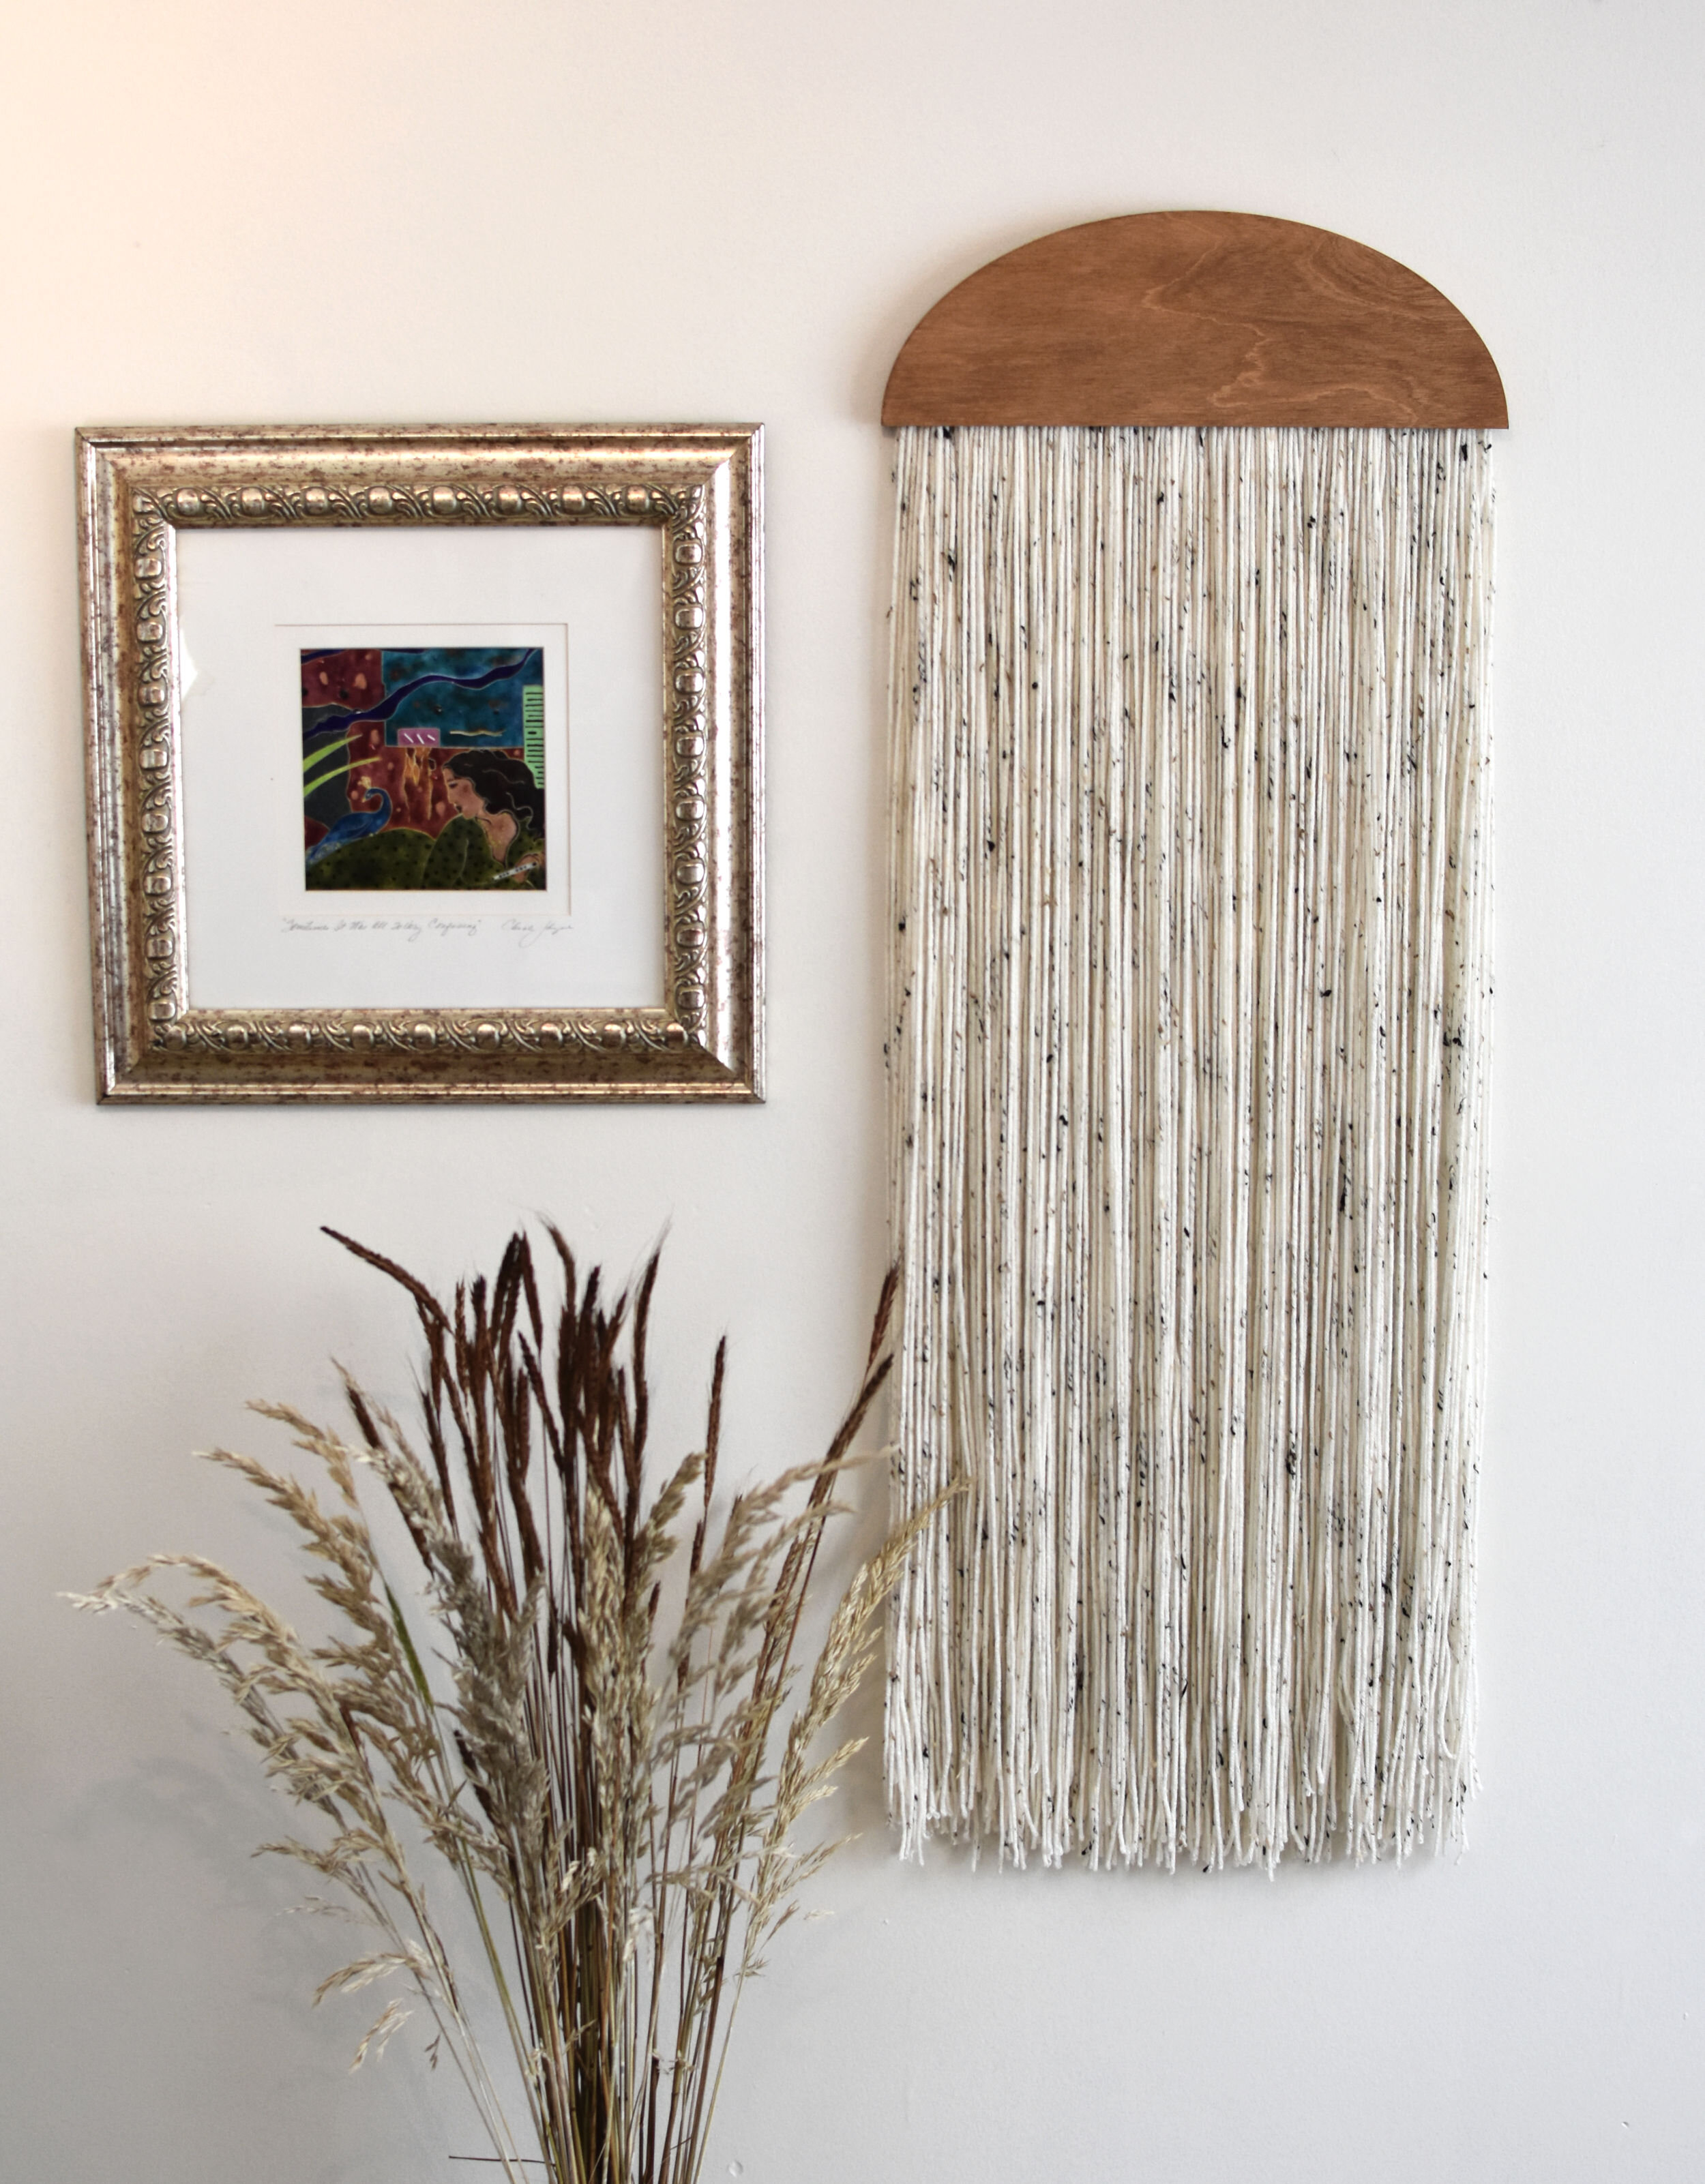 One of a kind Reclaimed materials Mini Hand Woven Weaving on Reclaimed Wood Display on a shelf or hang on the wall!